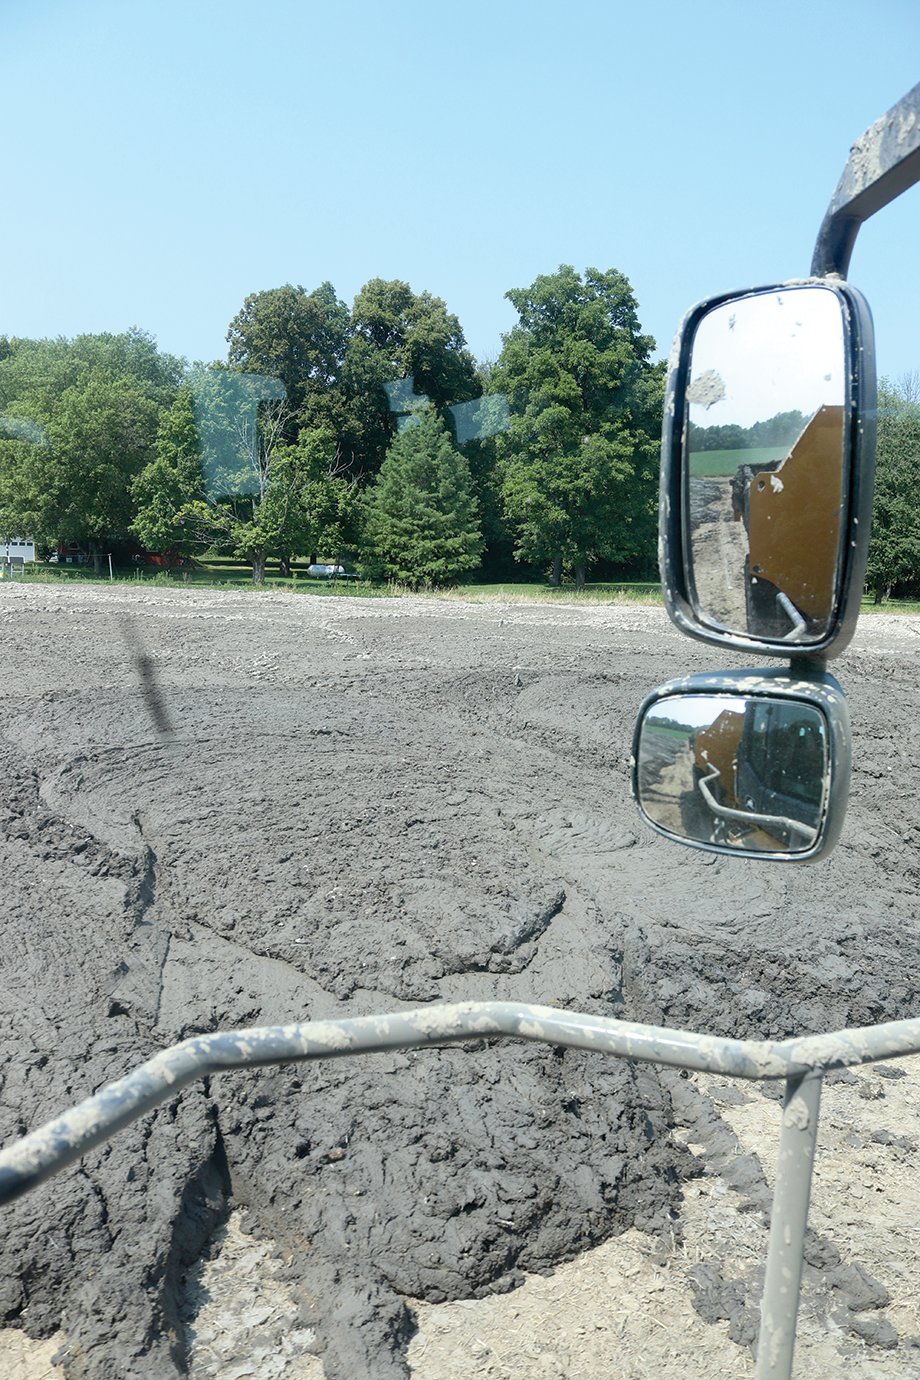 An expansive deposit of silt and mud from the Darlington Conservation Club pond dries in 90-degree temperatures Tuesday south of the club.